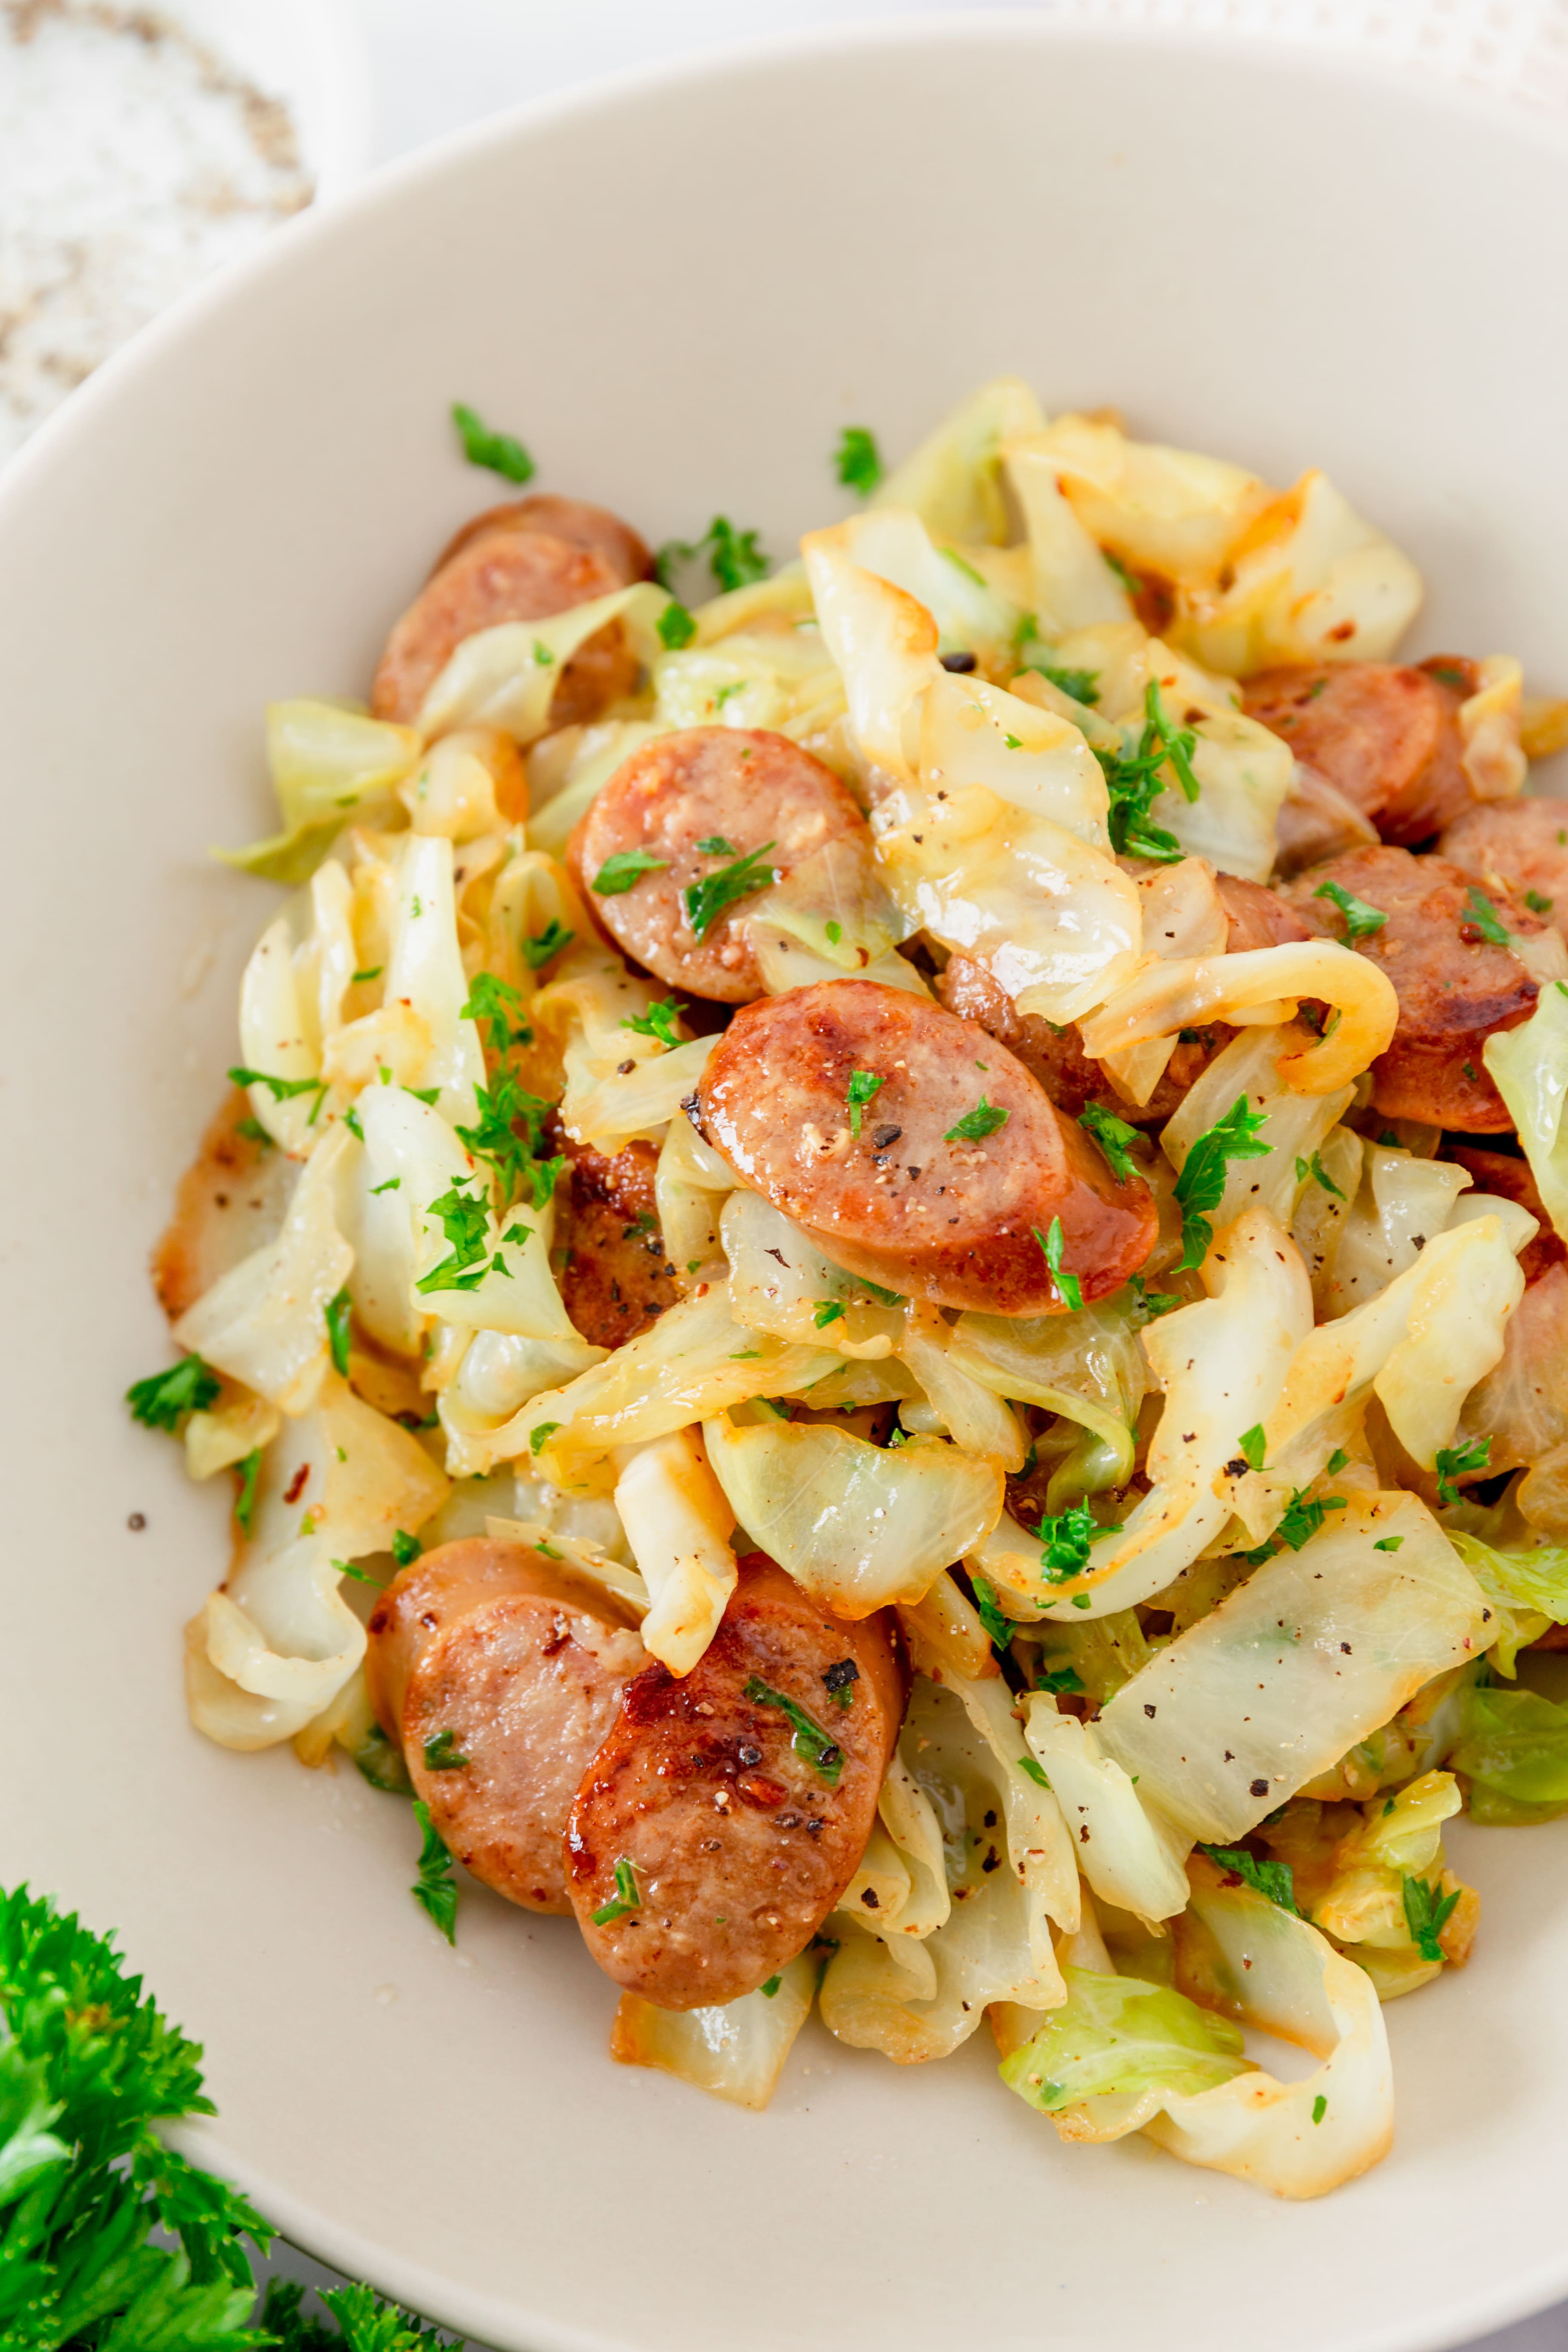 Prepared cabbage and sausage in a white bowl.